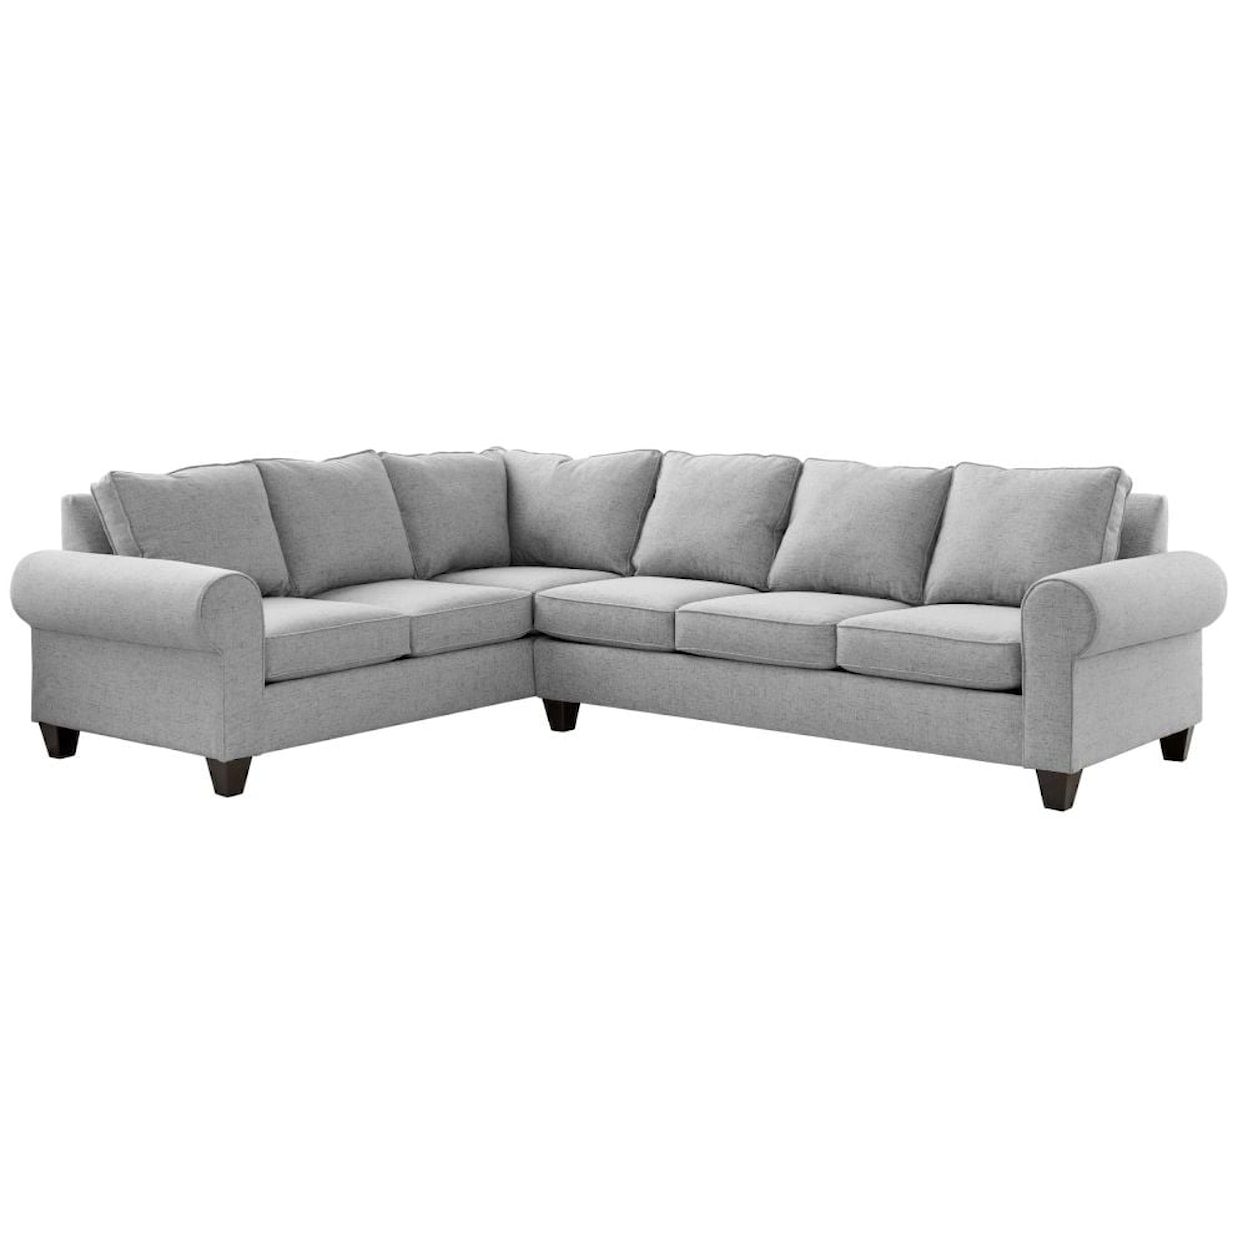 Elements 705 LHF Sectional Sofa with Rolled Arms